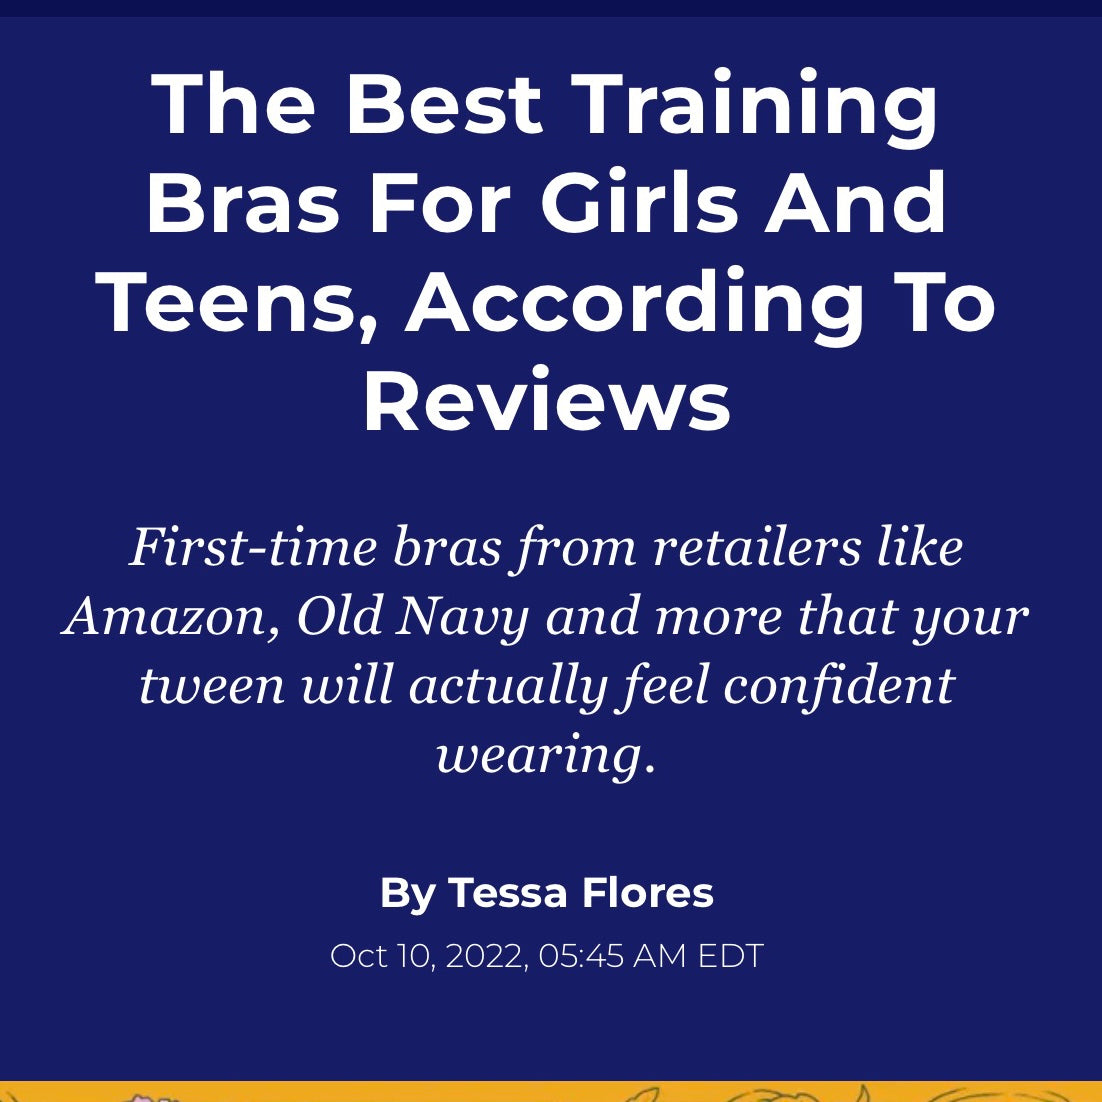 The Best Training Bras For Girls And Teens, According To Reviews